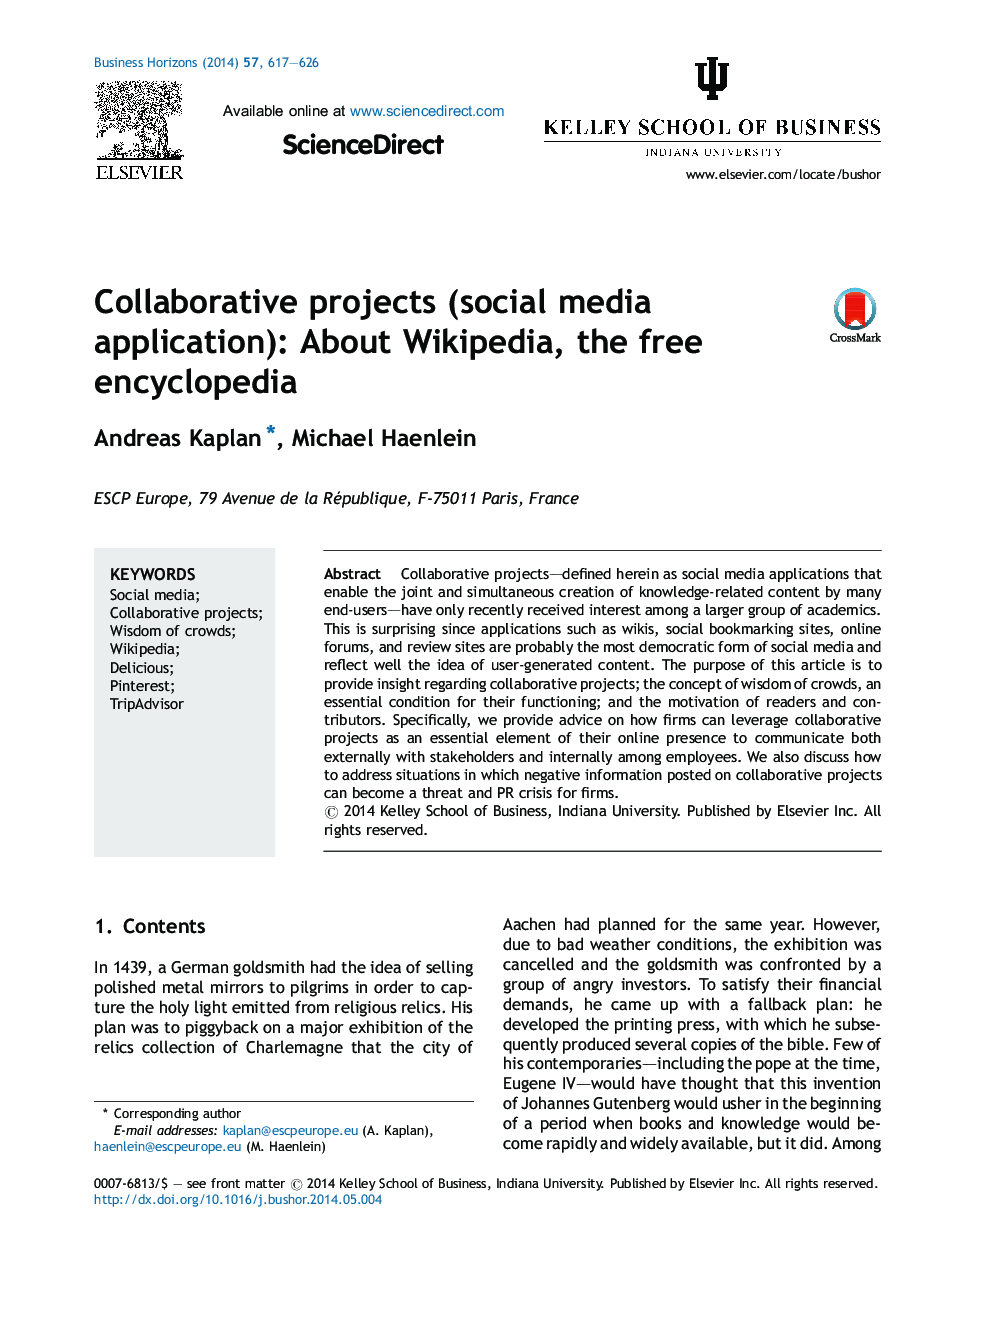 Collaborative projects (social media application): About Wikipedia, the free encyclopedia